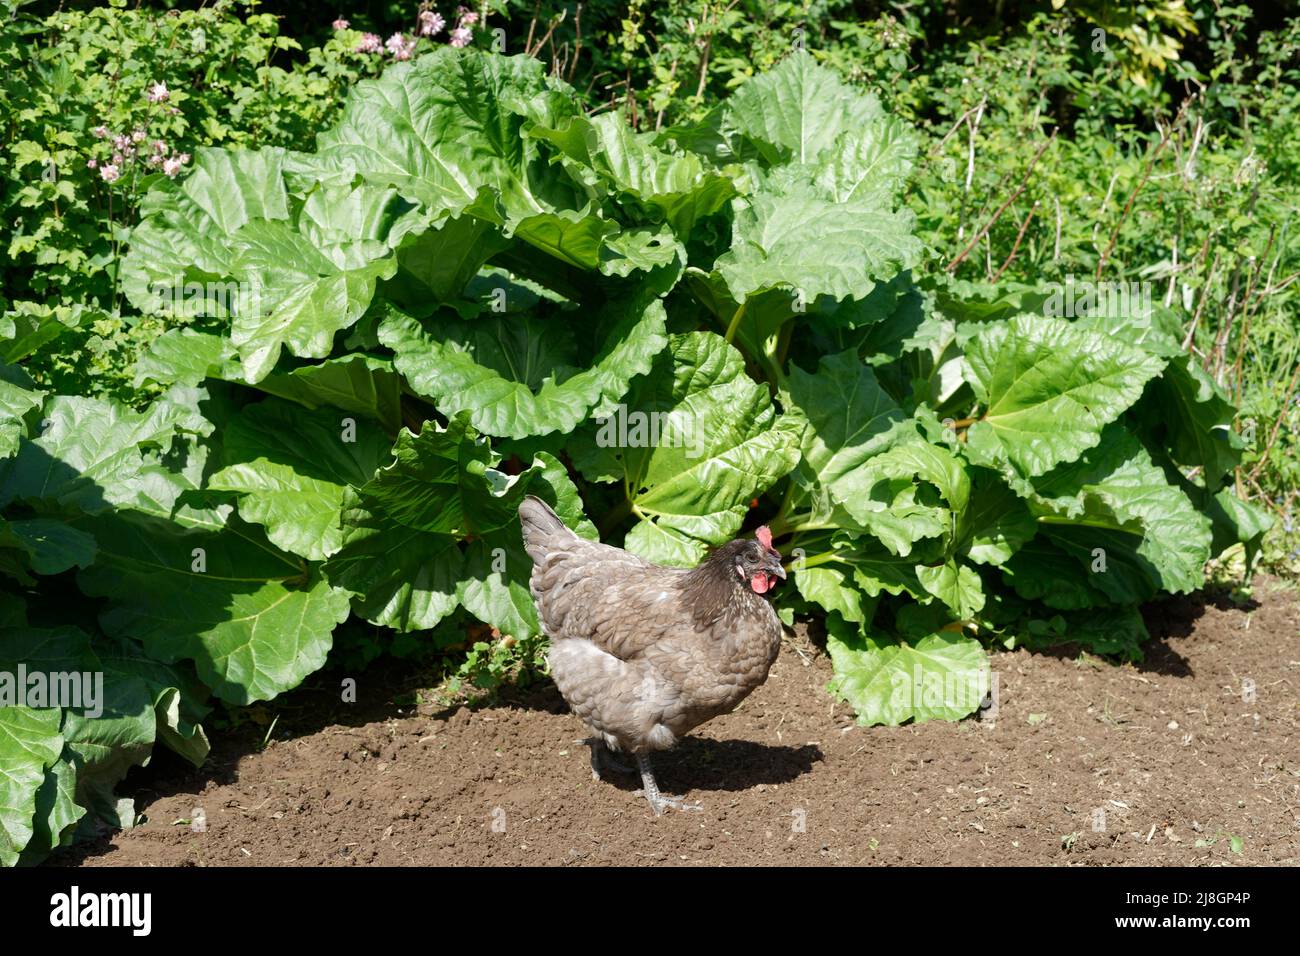 A hen in front of rhubarb in a vegetable garden Stock Photo